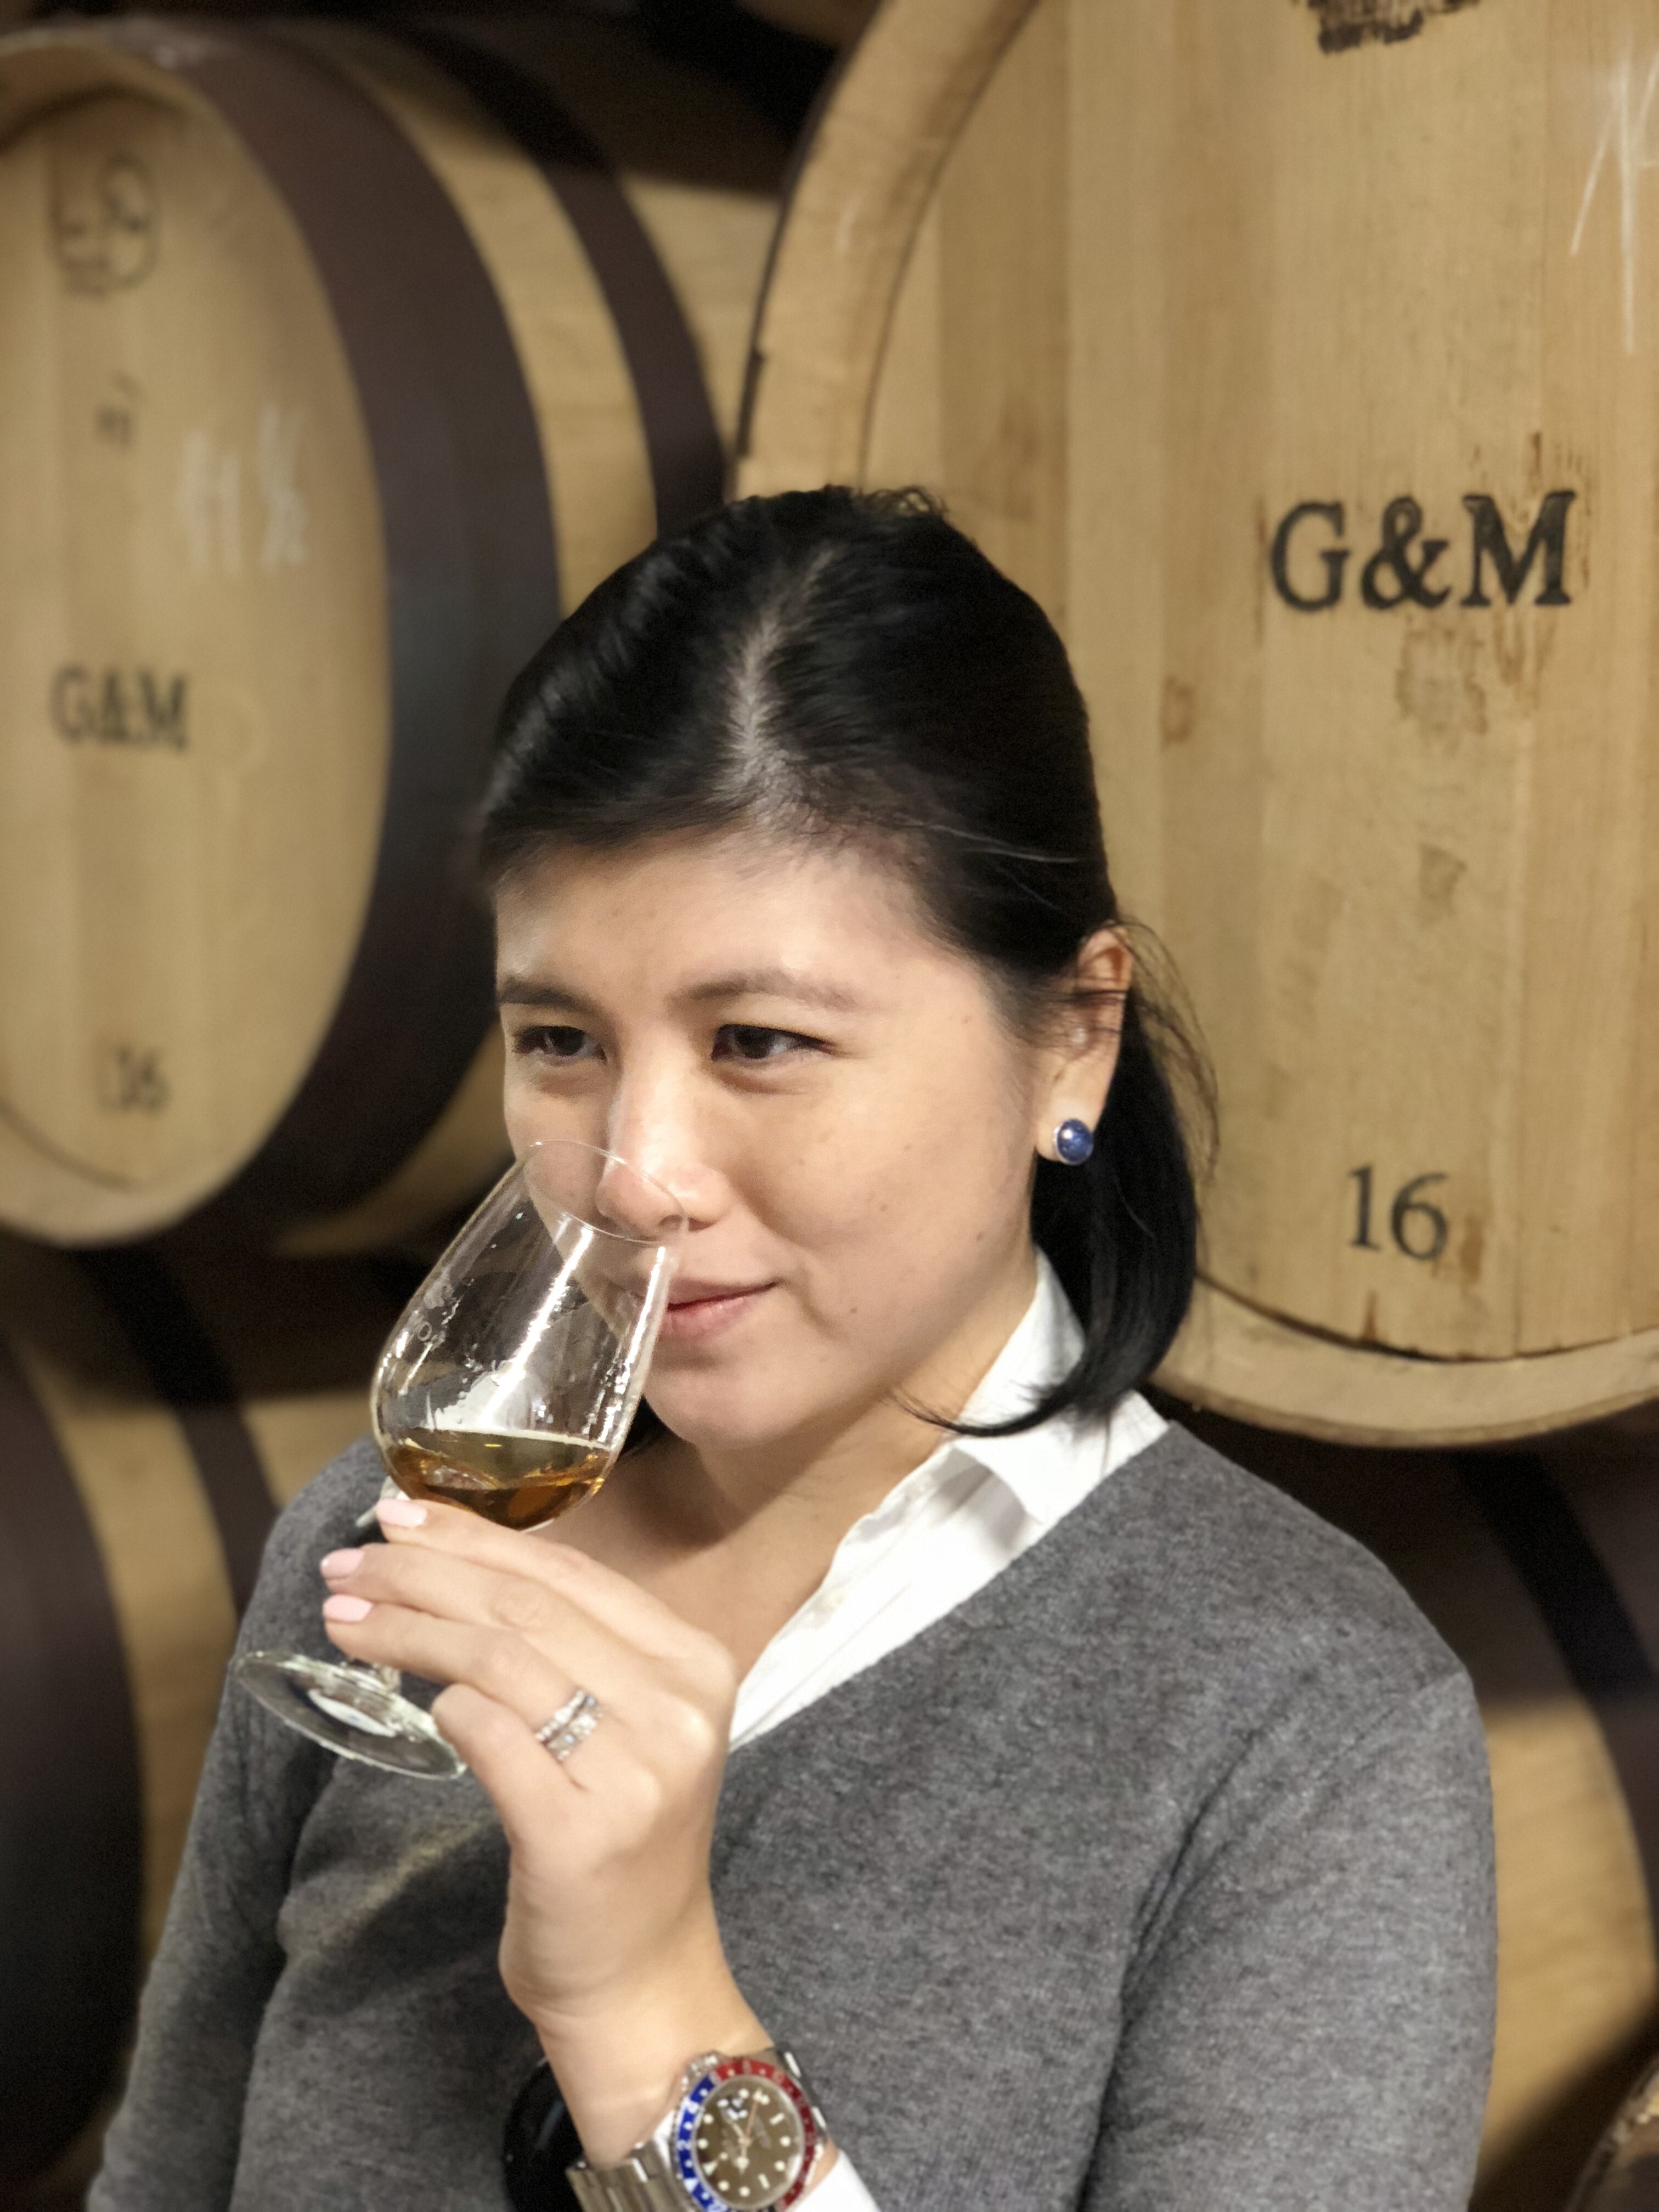 Eiling Lim buys cask whisky and bottles it under her own brand. She is an example of the Asian women who have moved into the drinks industry and are making their mark. Photo: courtesy Eiling Lim